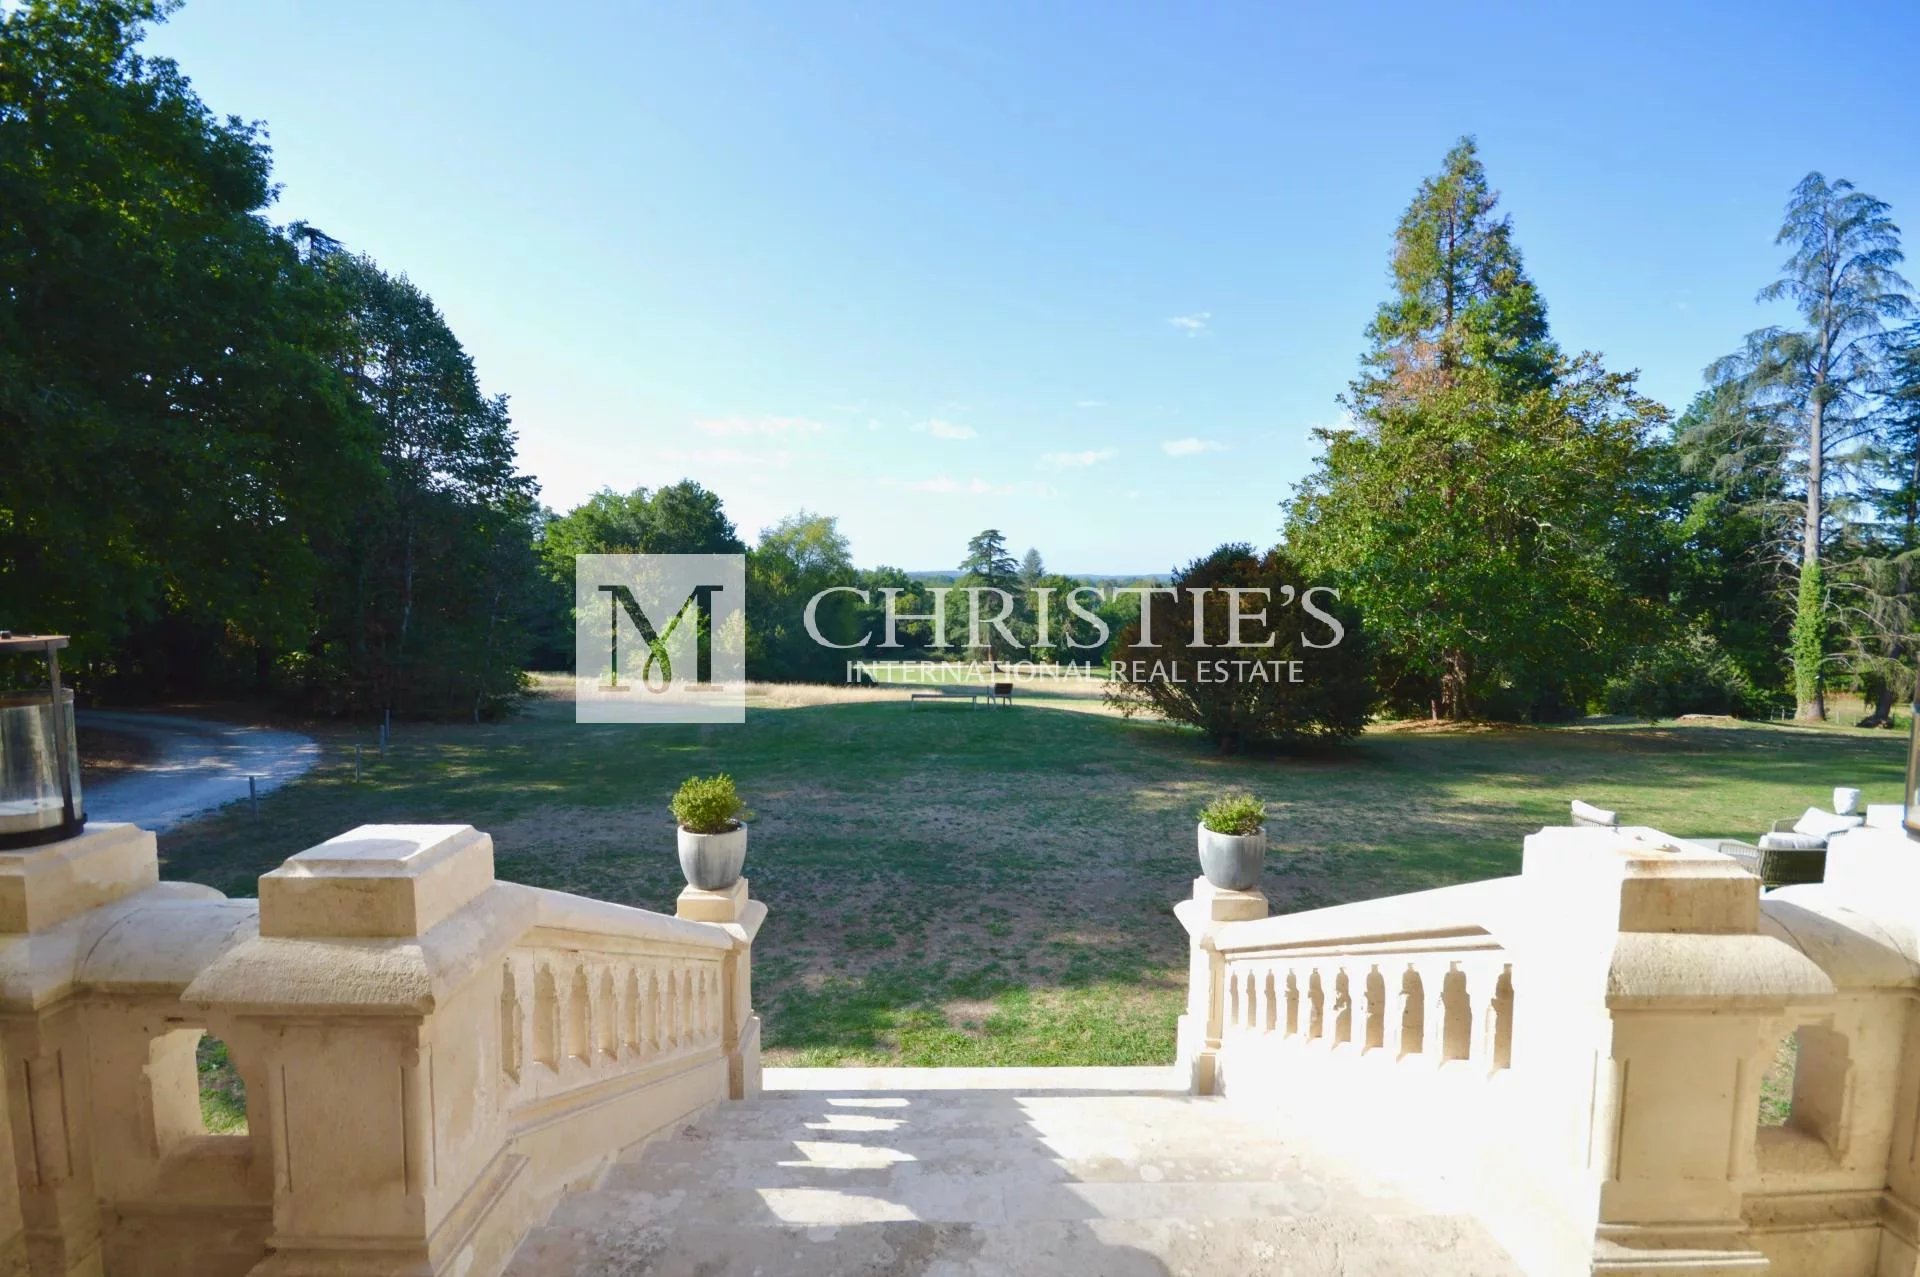 Enchanting Chateau with 9 hectares of land near Bergerac